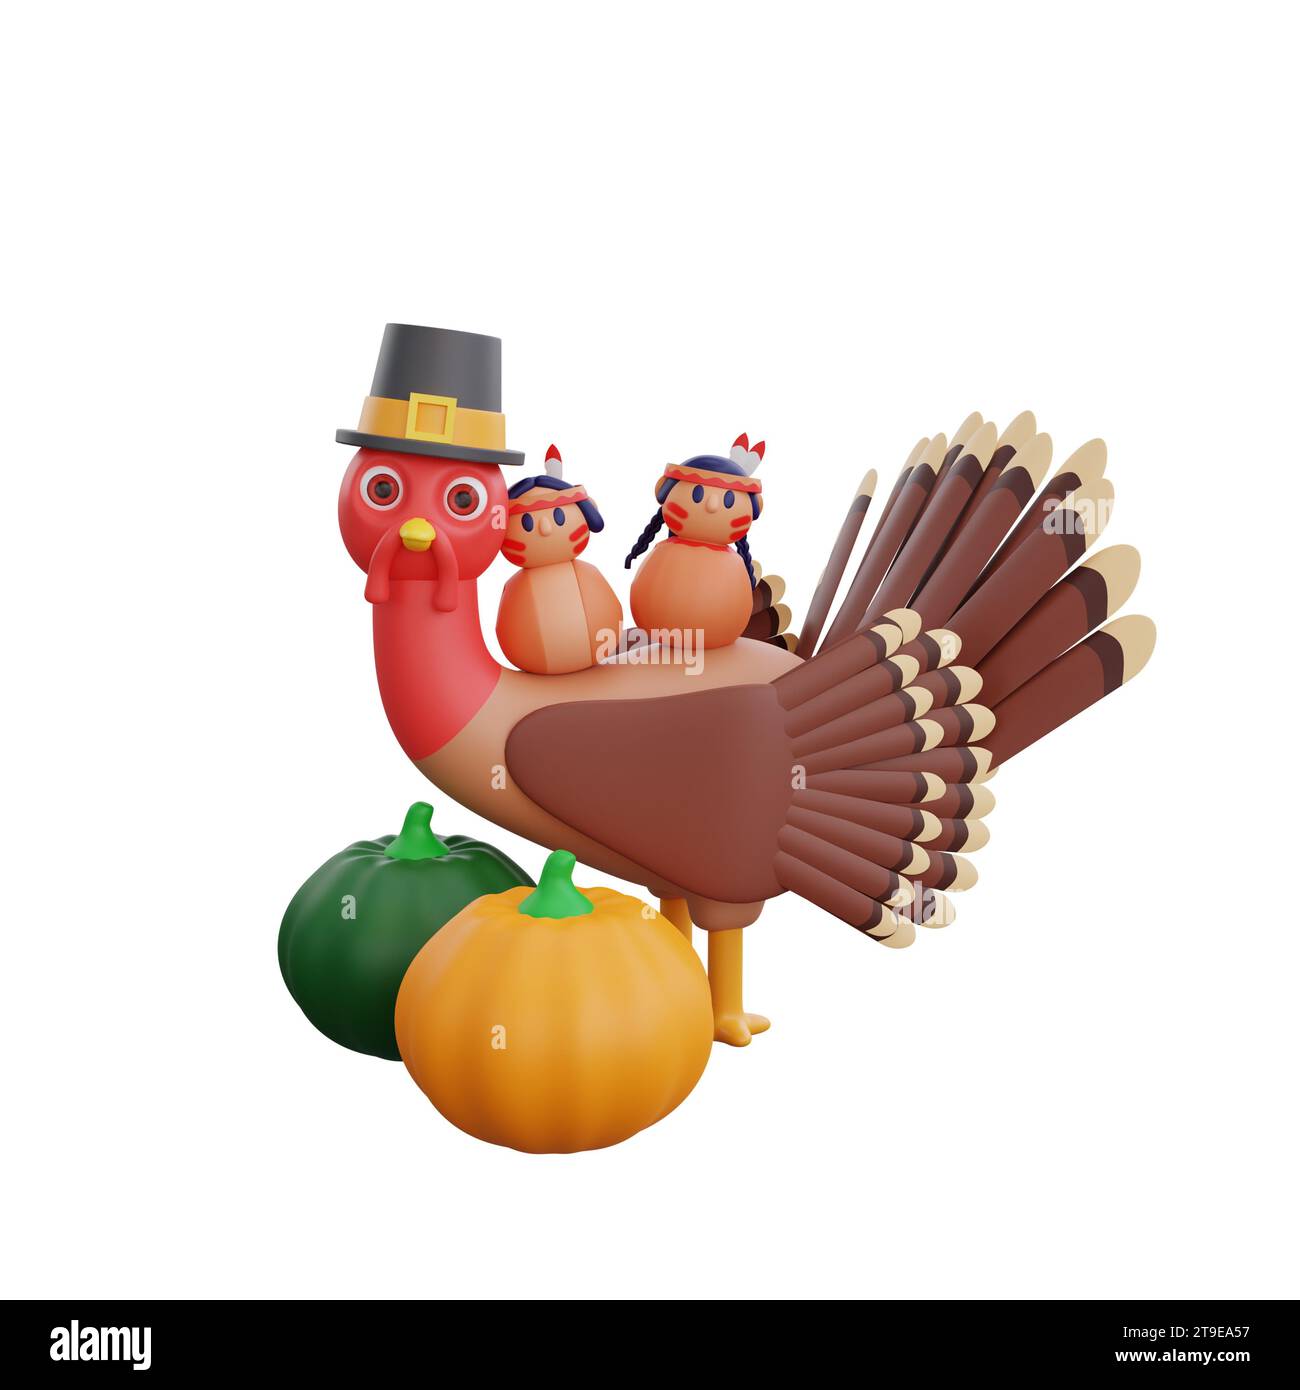 3d illustration of a turkey wearing a hat and two Native American dolls, accompanied by two vibrant pumpkins. perfect theme for Thanksgiving design Stock Photo